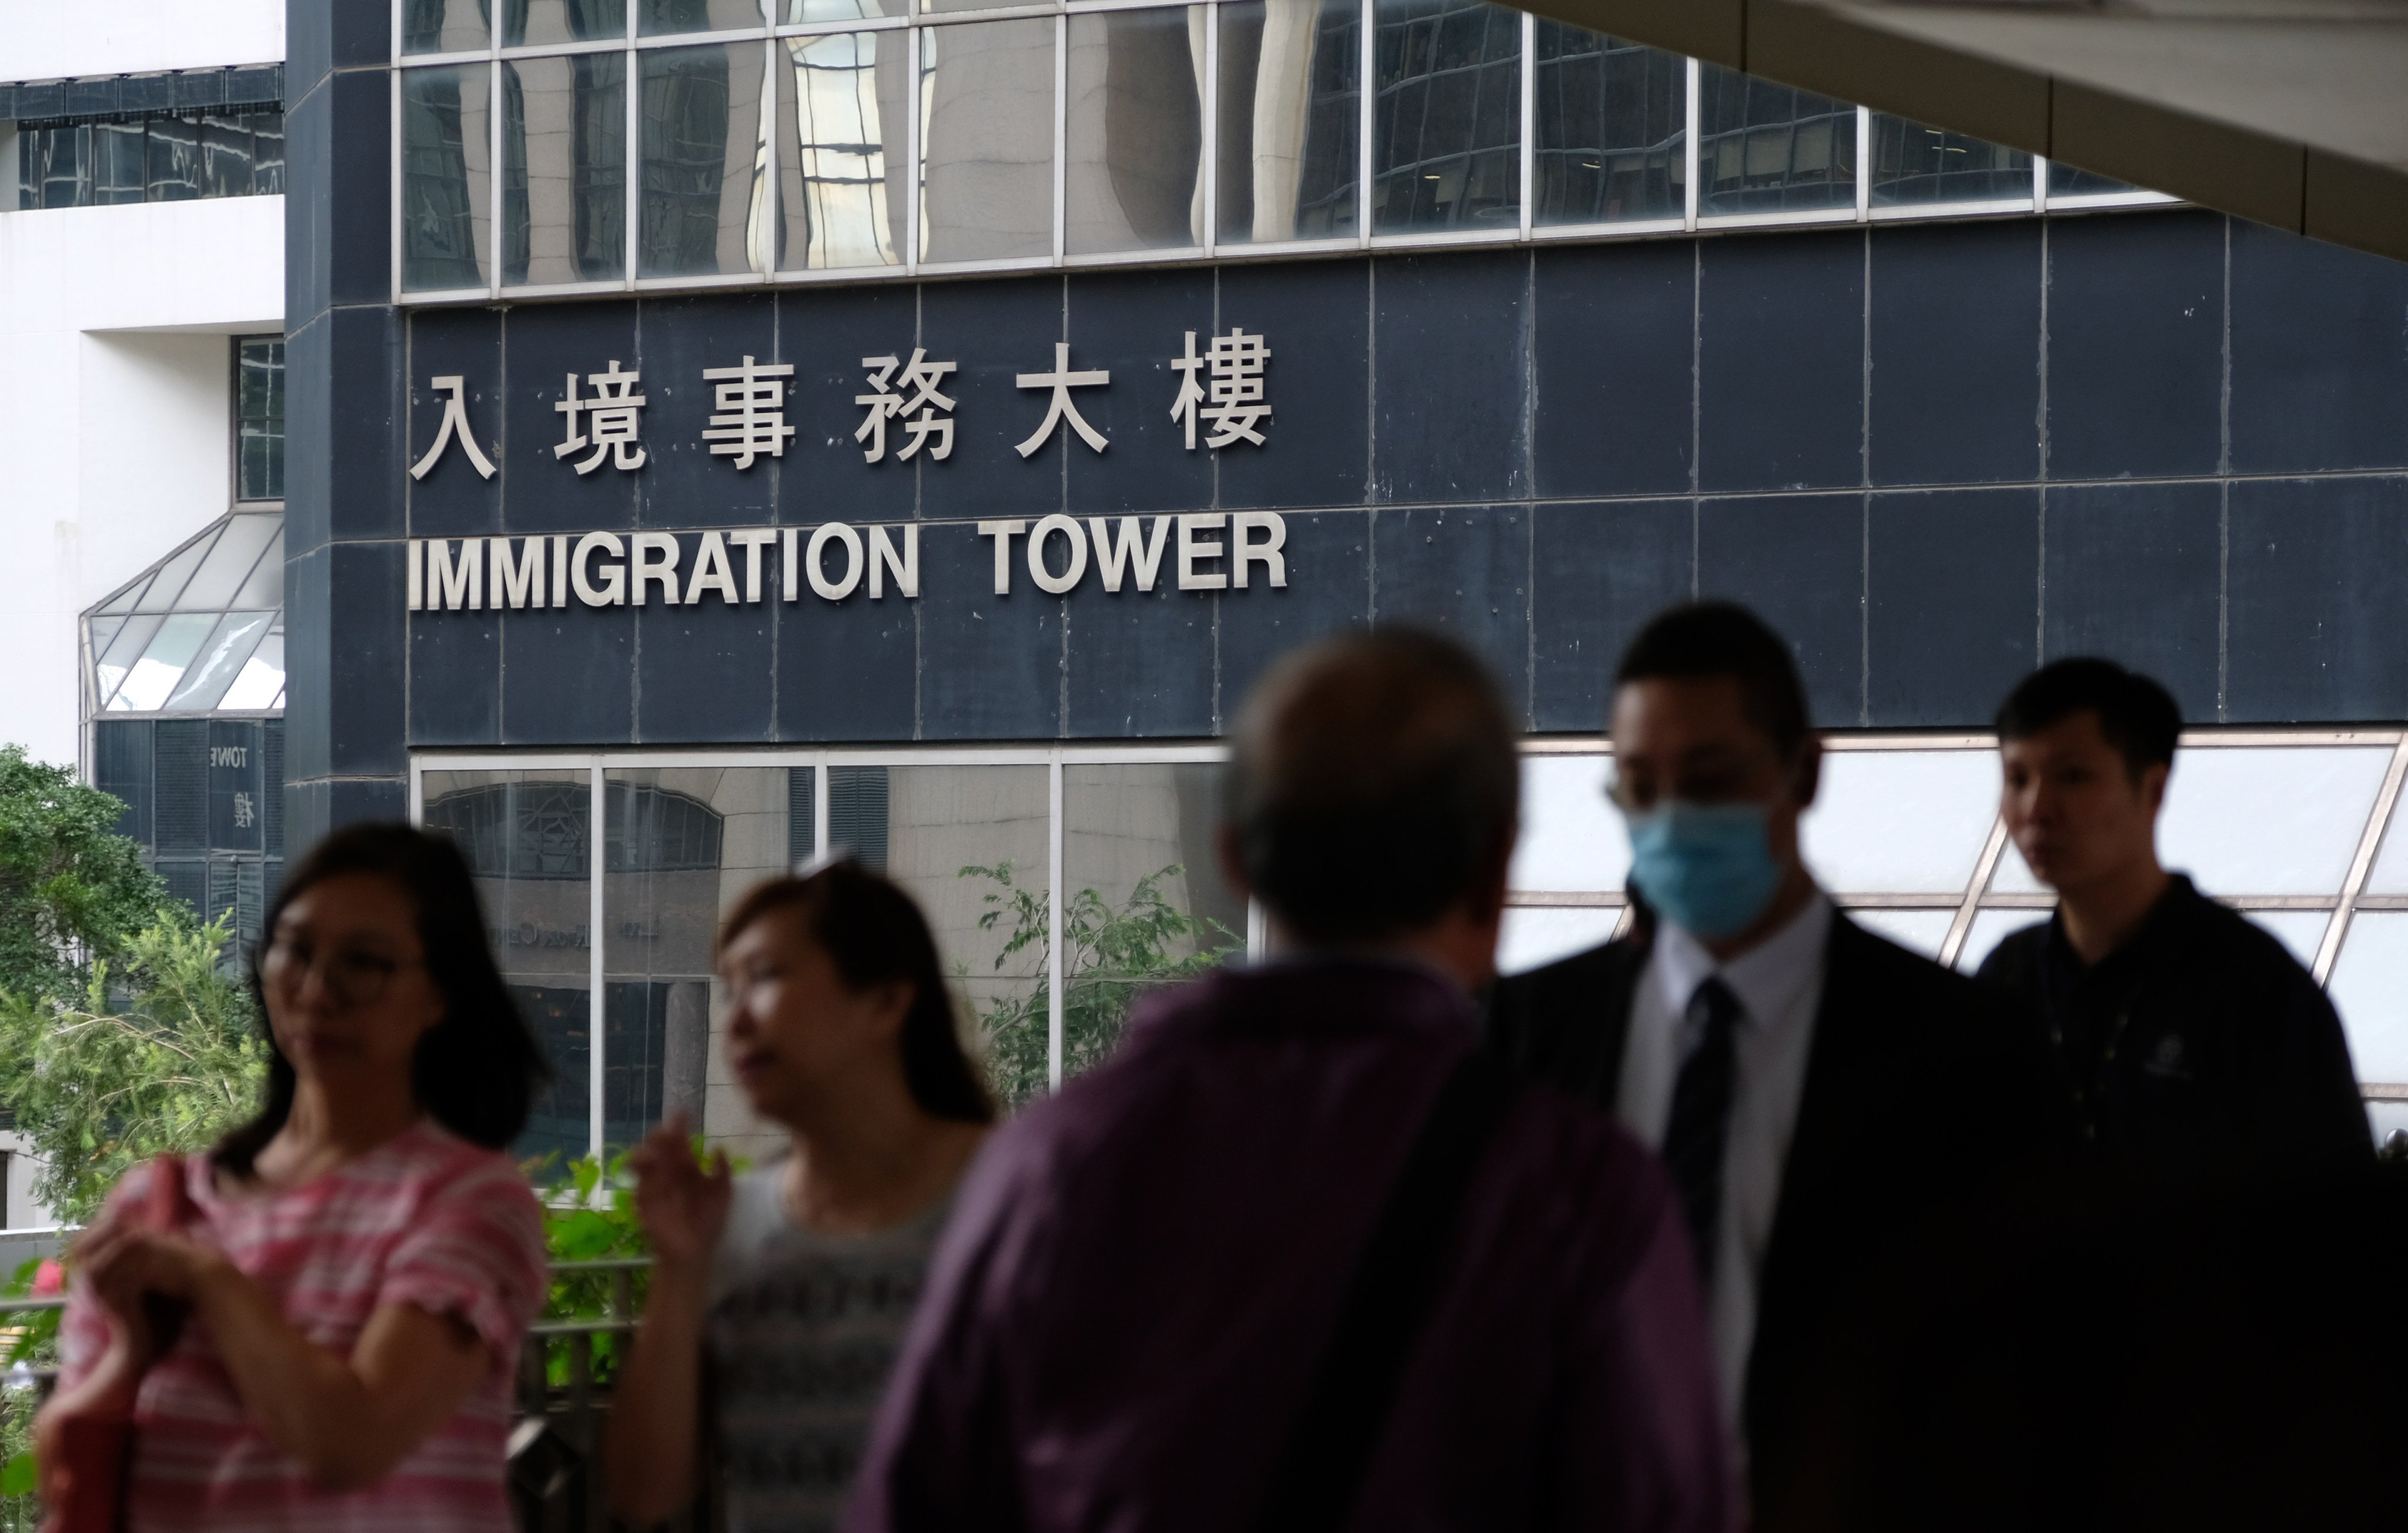 The city’s leader has said immigration authorities always act in accordance with procedures when reviewing visa applications. Photo: Fung Chang